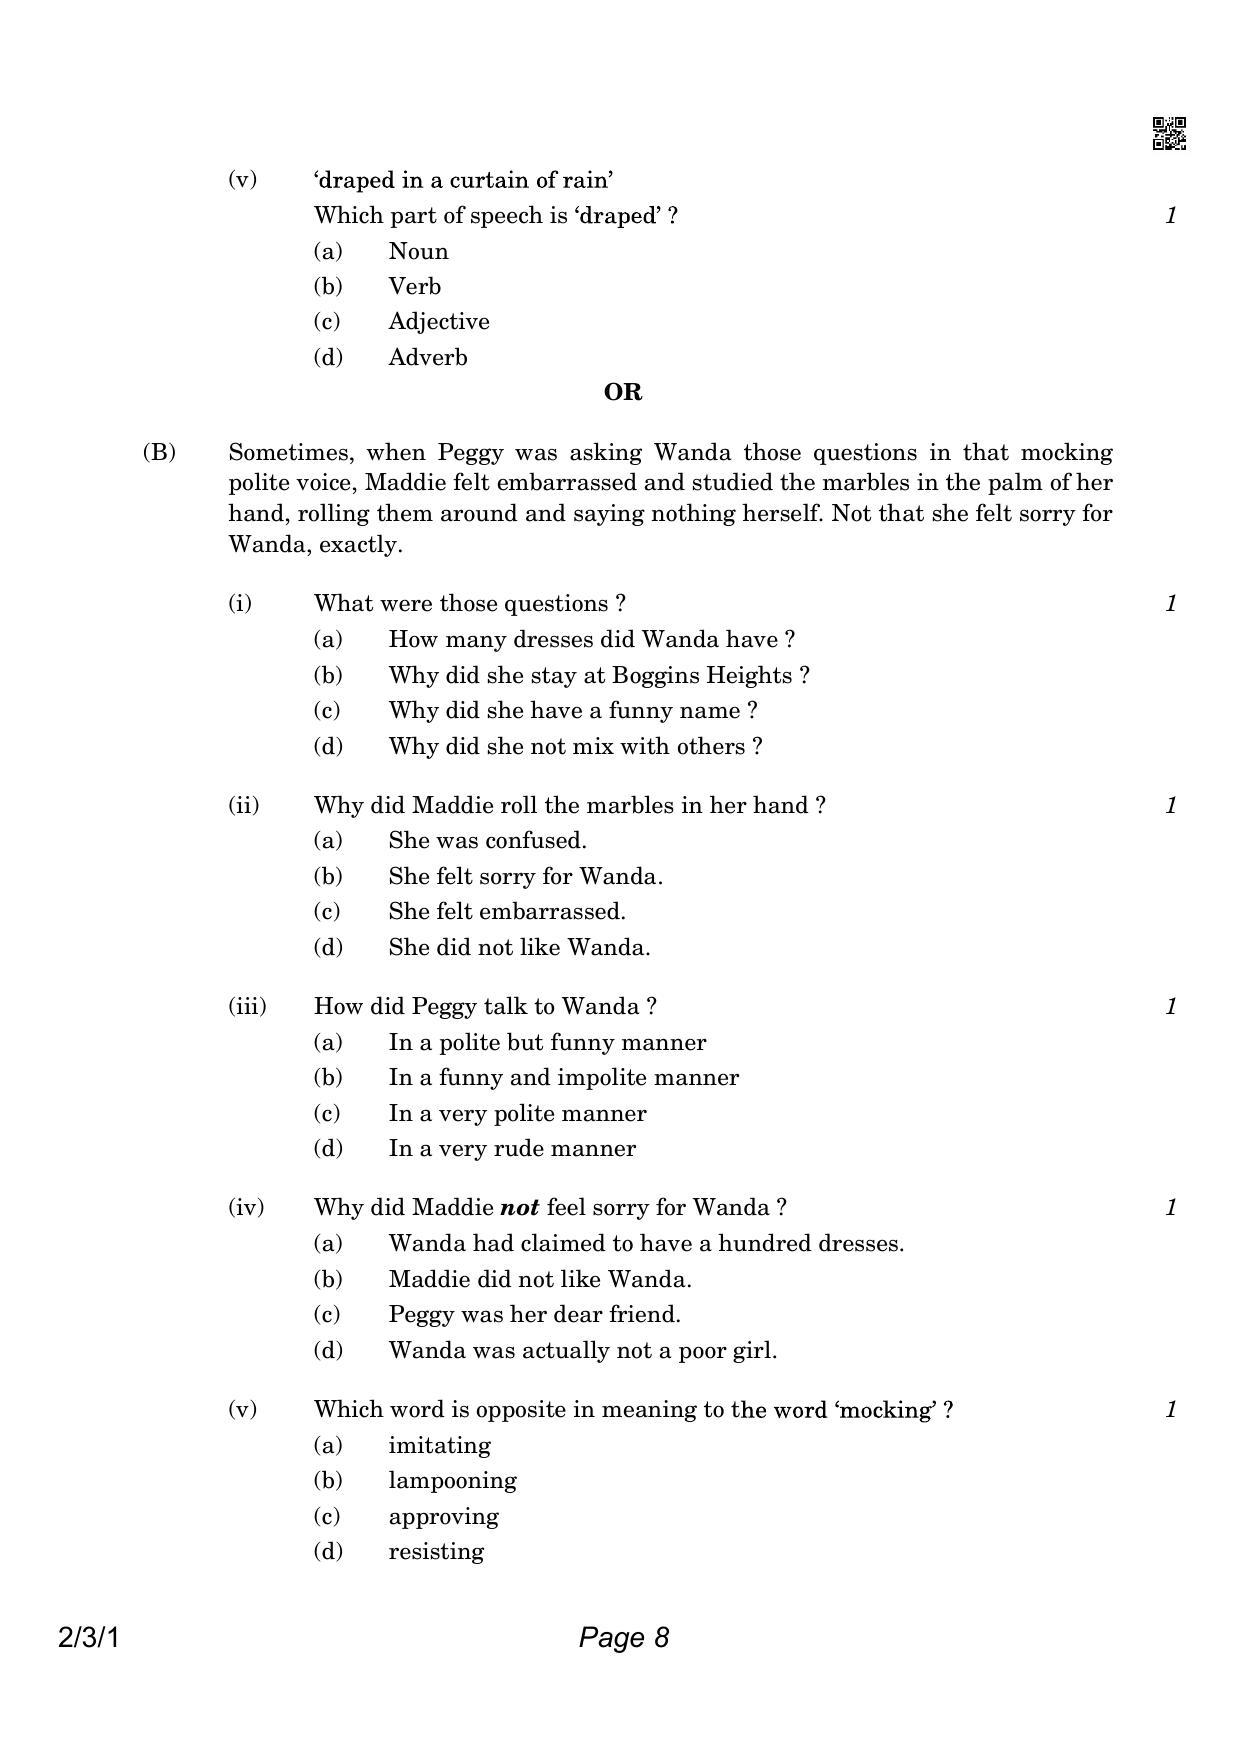 CBSE Class 10 QP_184_ENGLISH_LANGUAGE_AND_LITERATURE 2021 Compartment Question Paper - Page 8